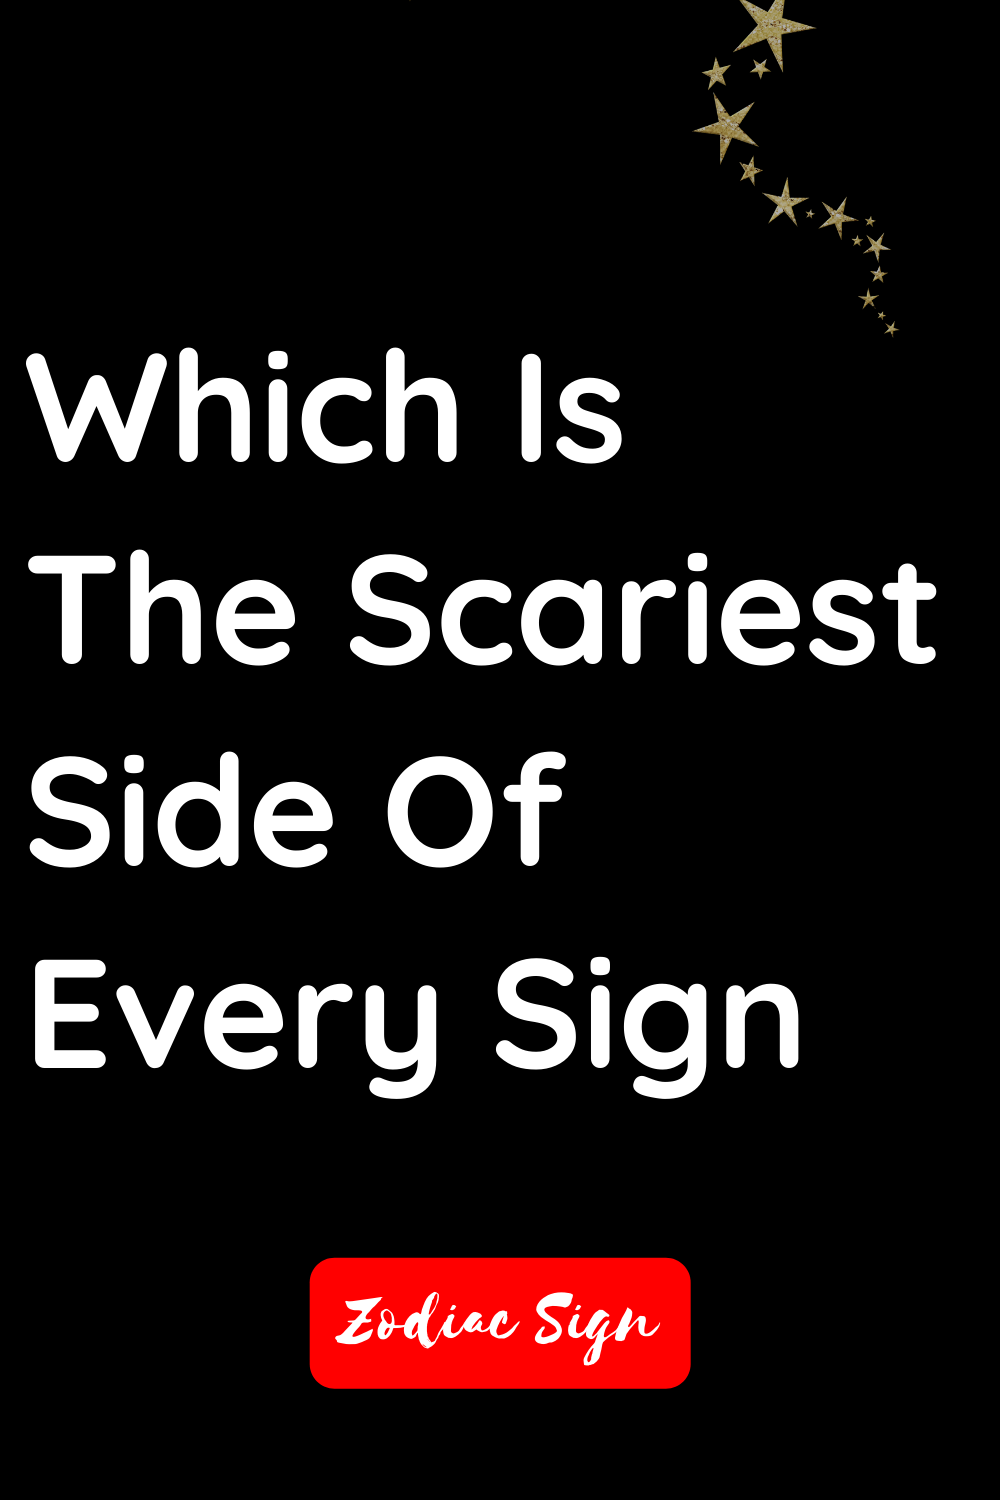 Which is the scariest side of every sign